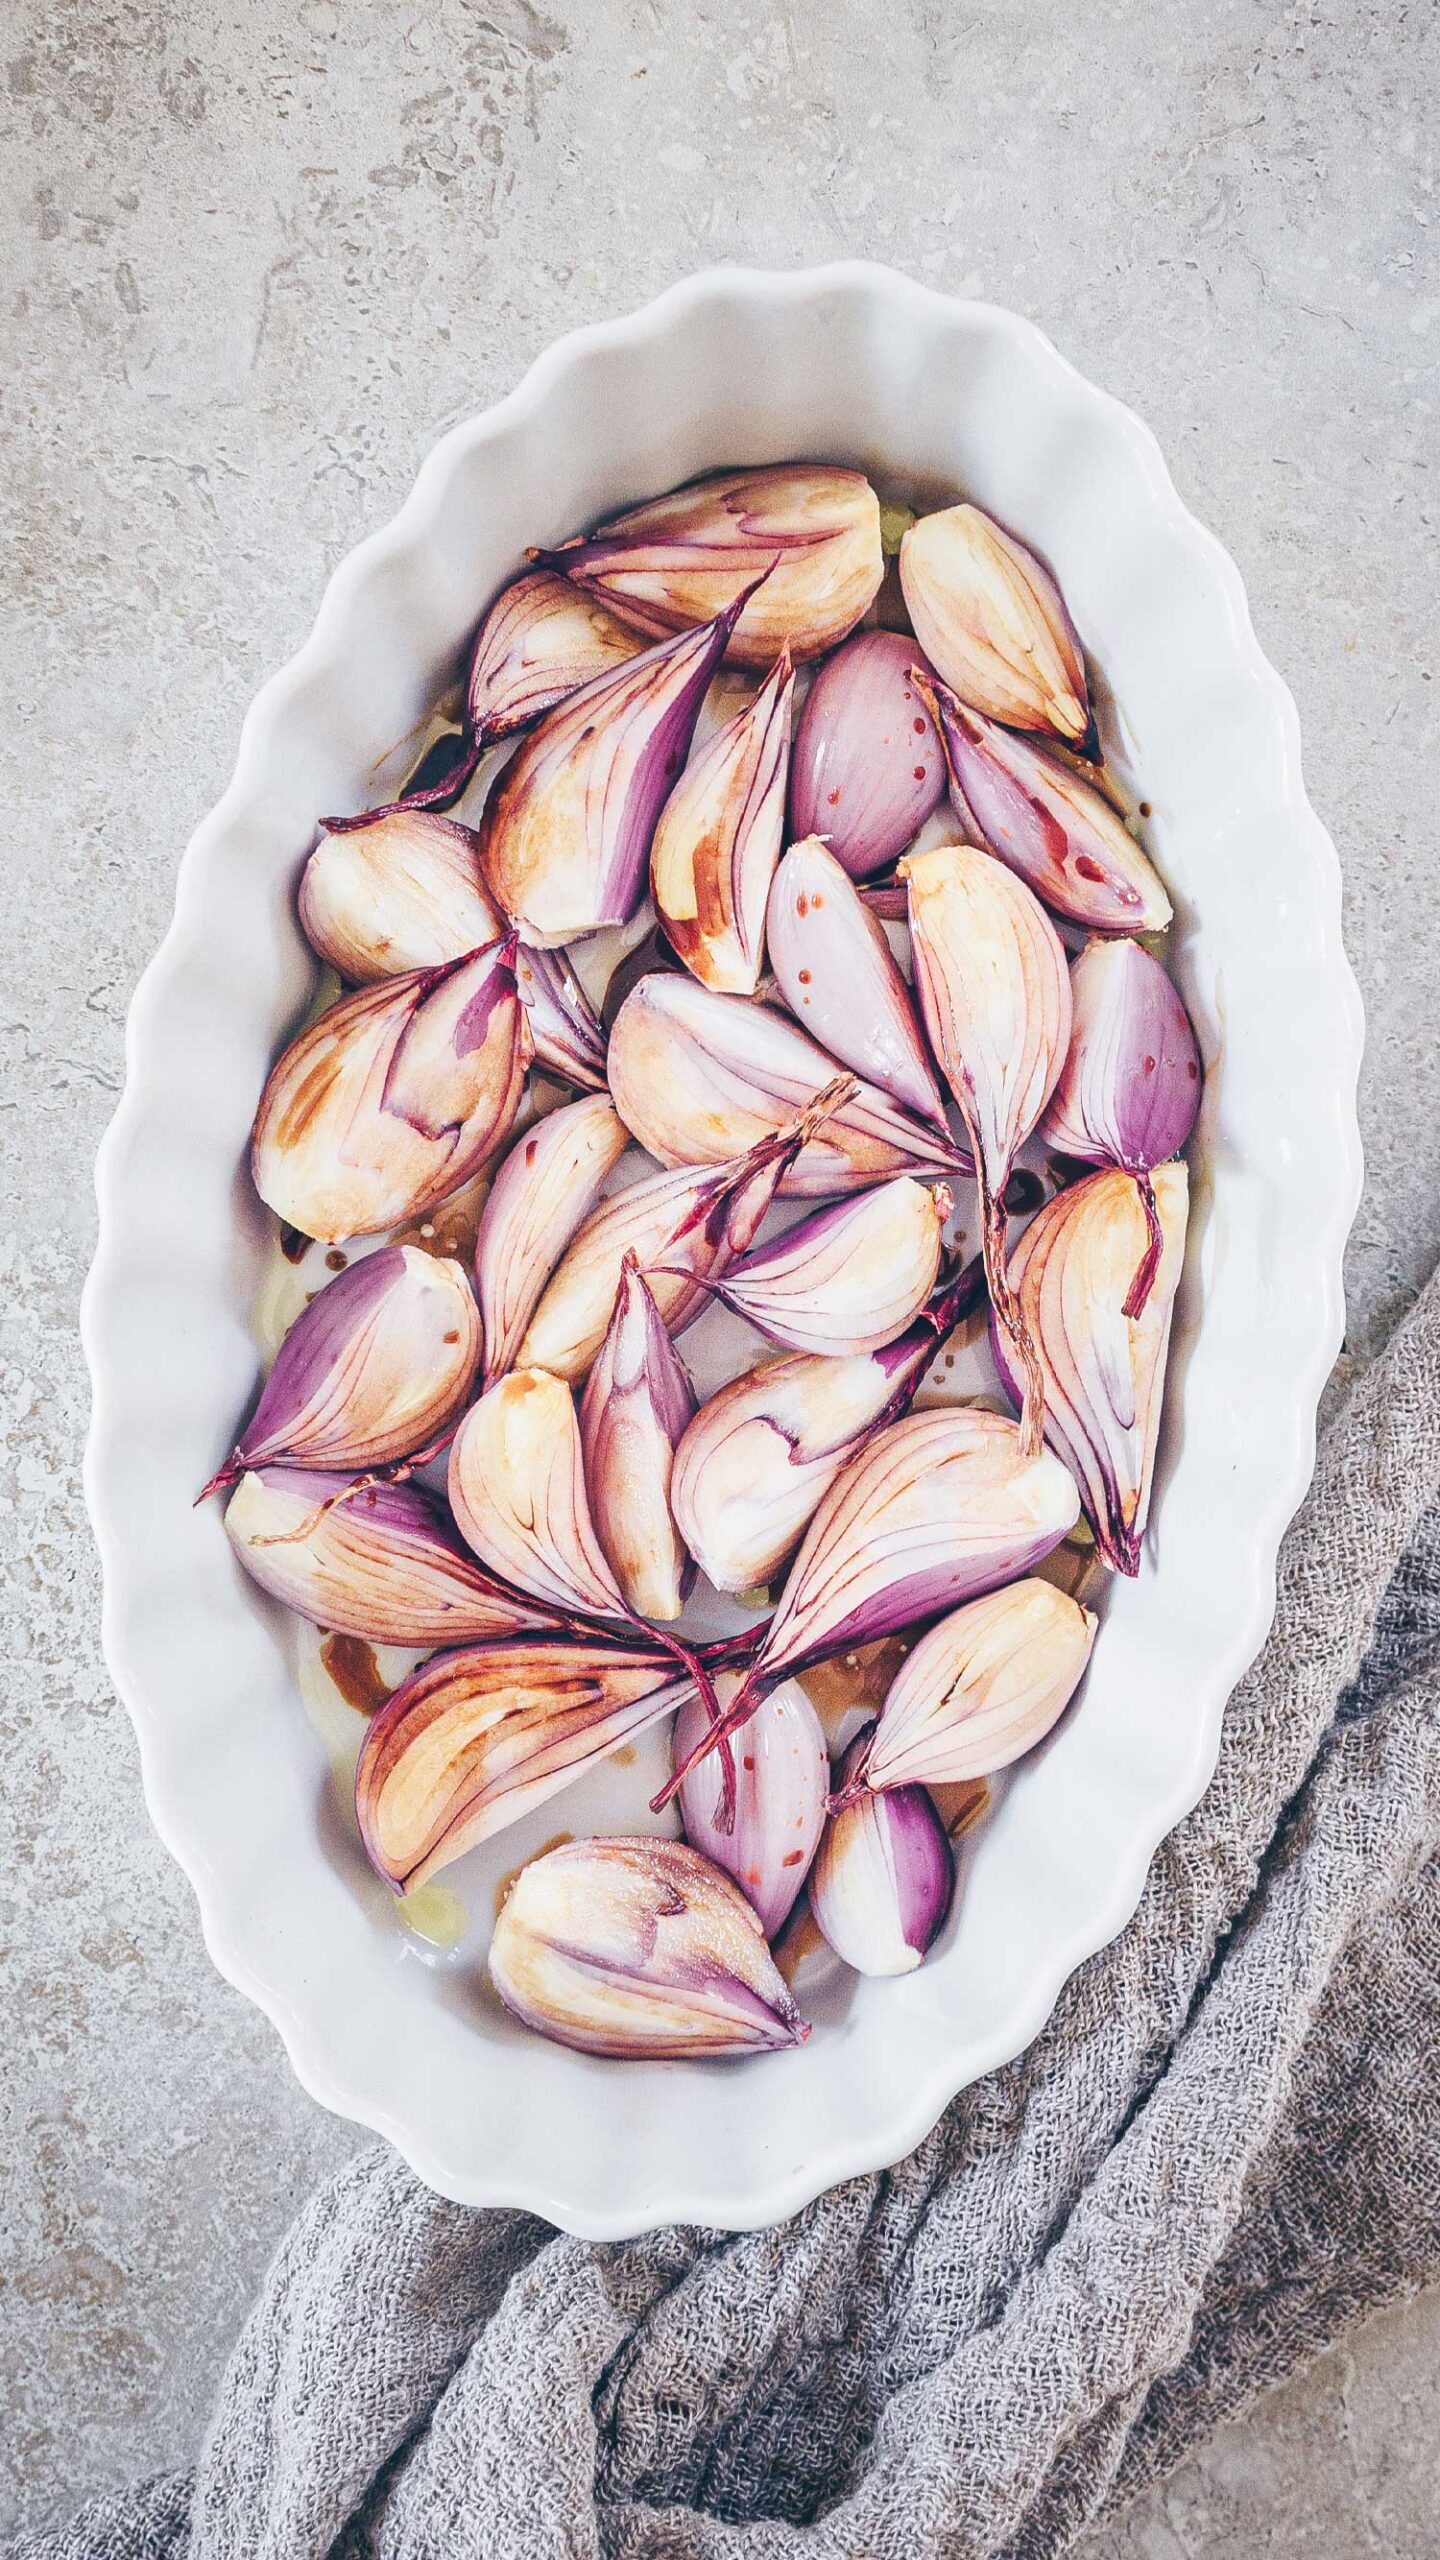 A white porcelain fluted oval baking dish with peeled shallots coated in olive oil and balsamic vinegar.